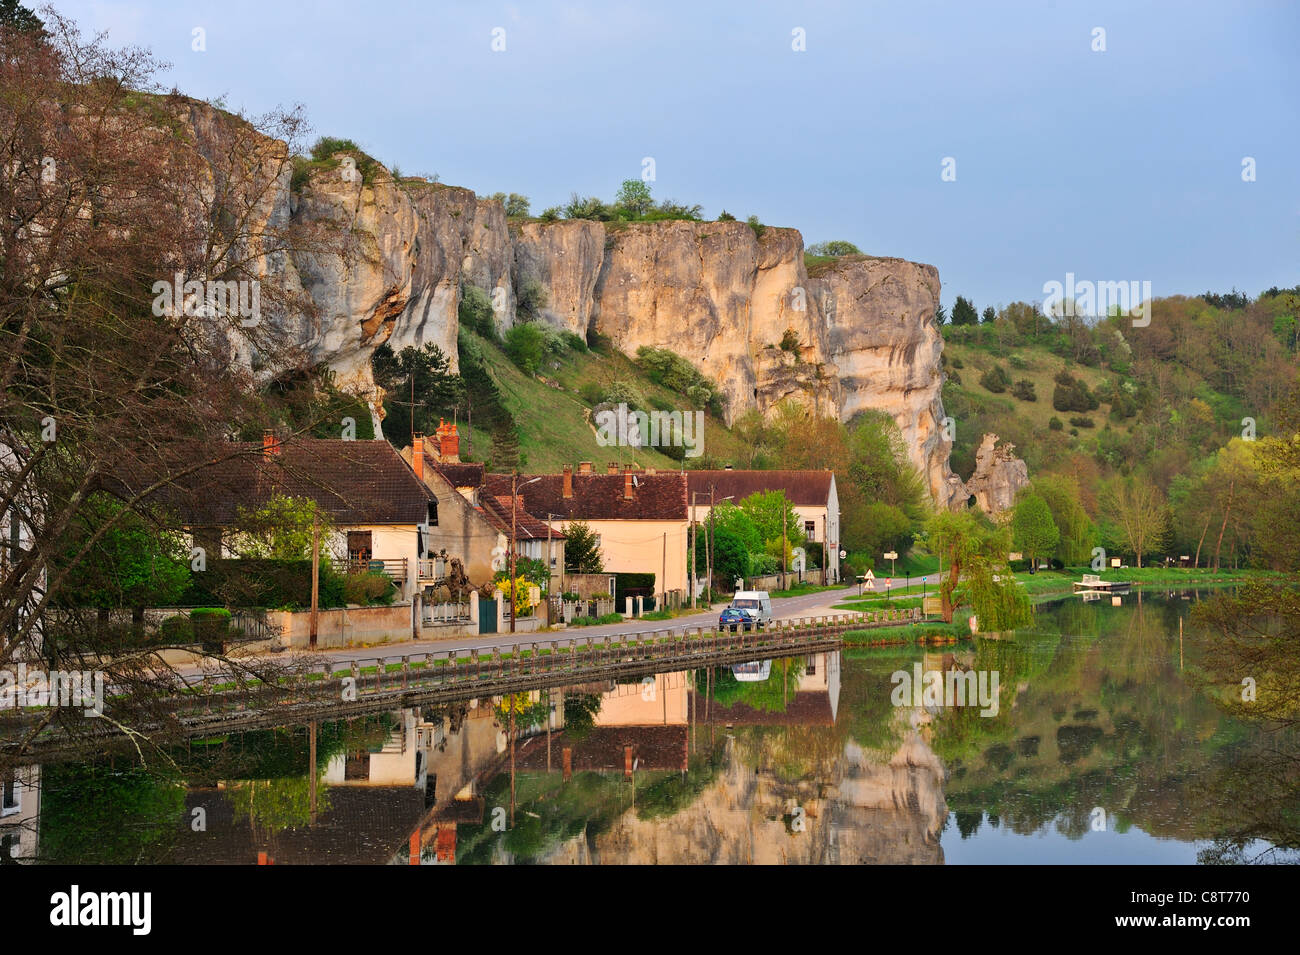 The Rochers du Saussois and the Nivernais canal, on the Yonne River near Merry sur Yonne Stock Photo